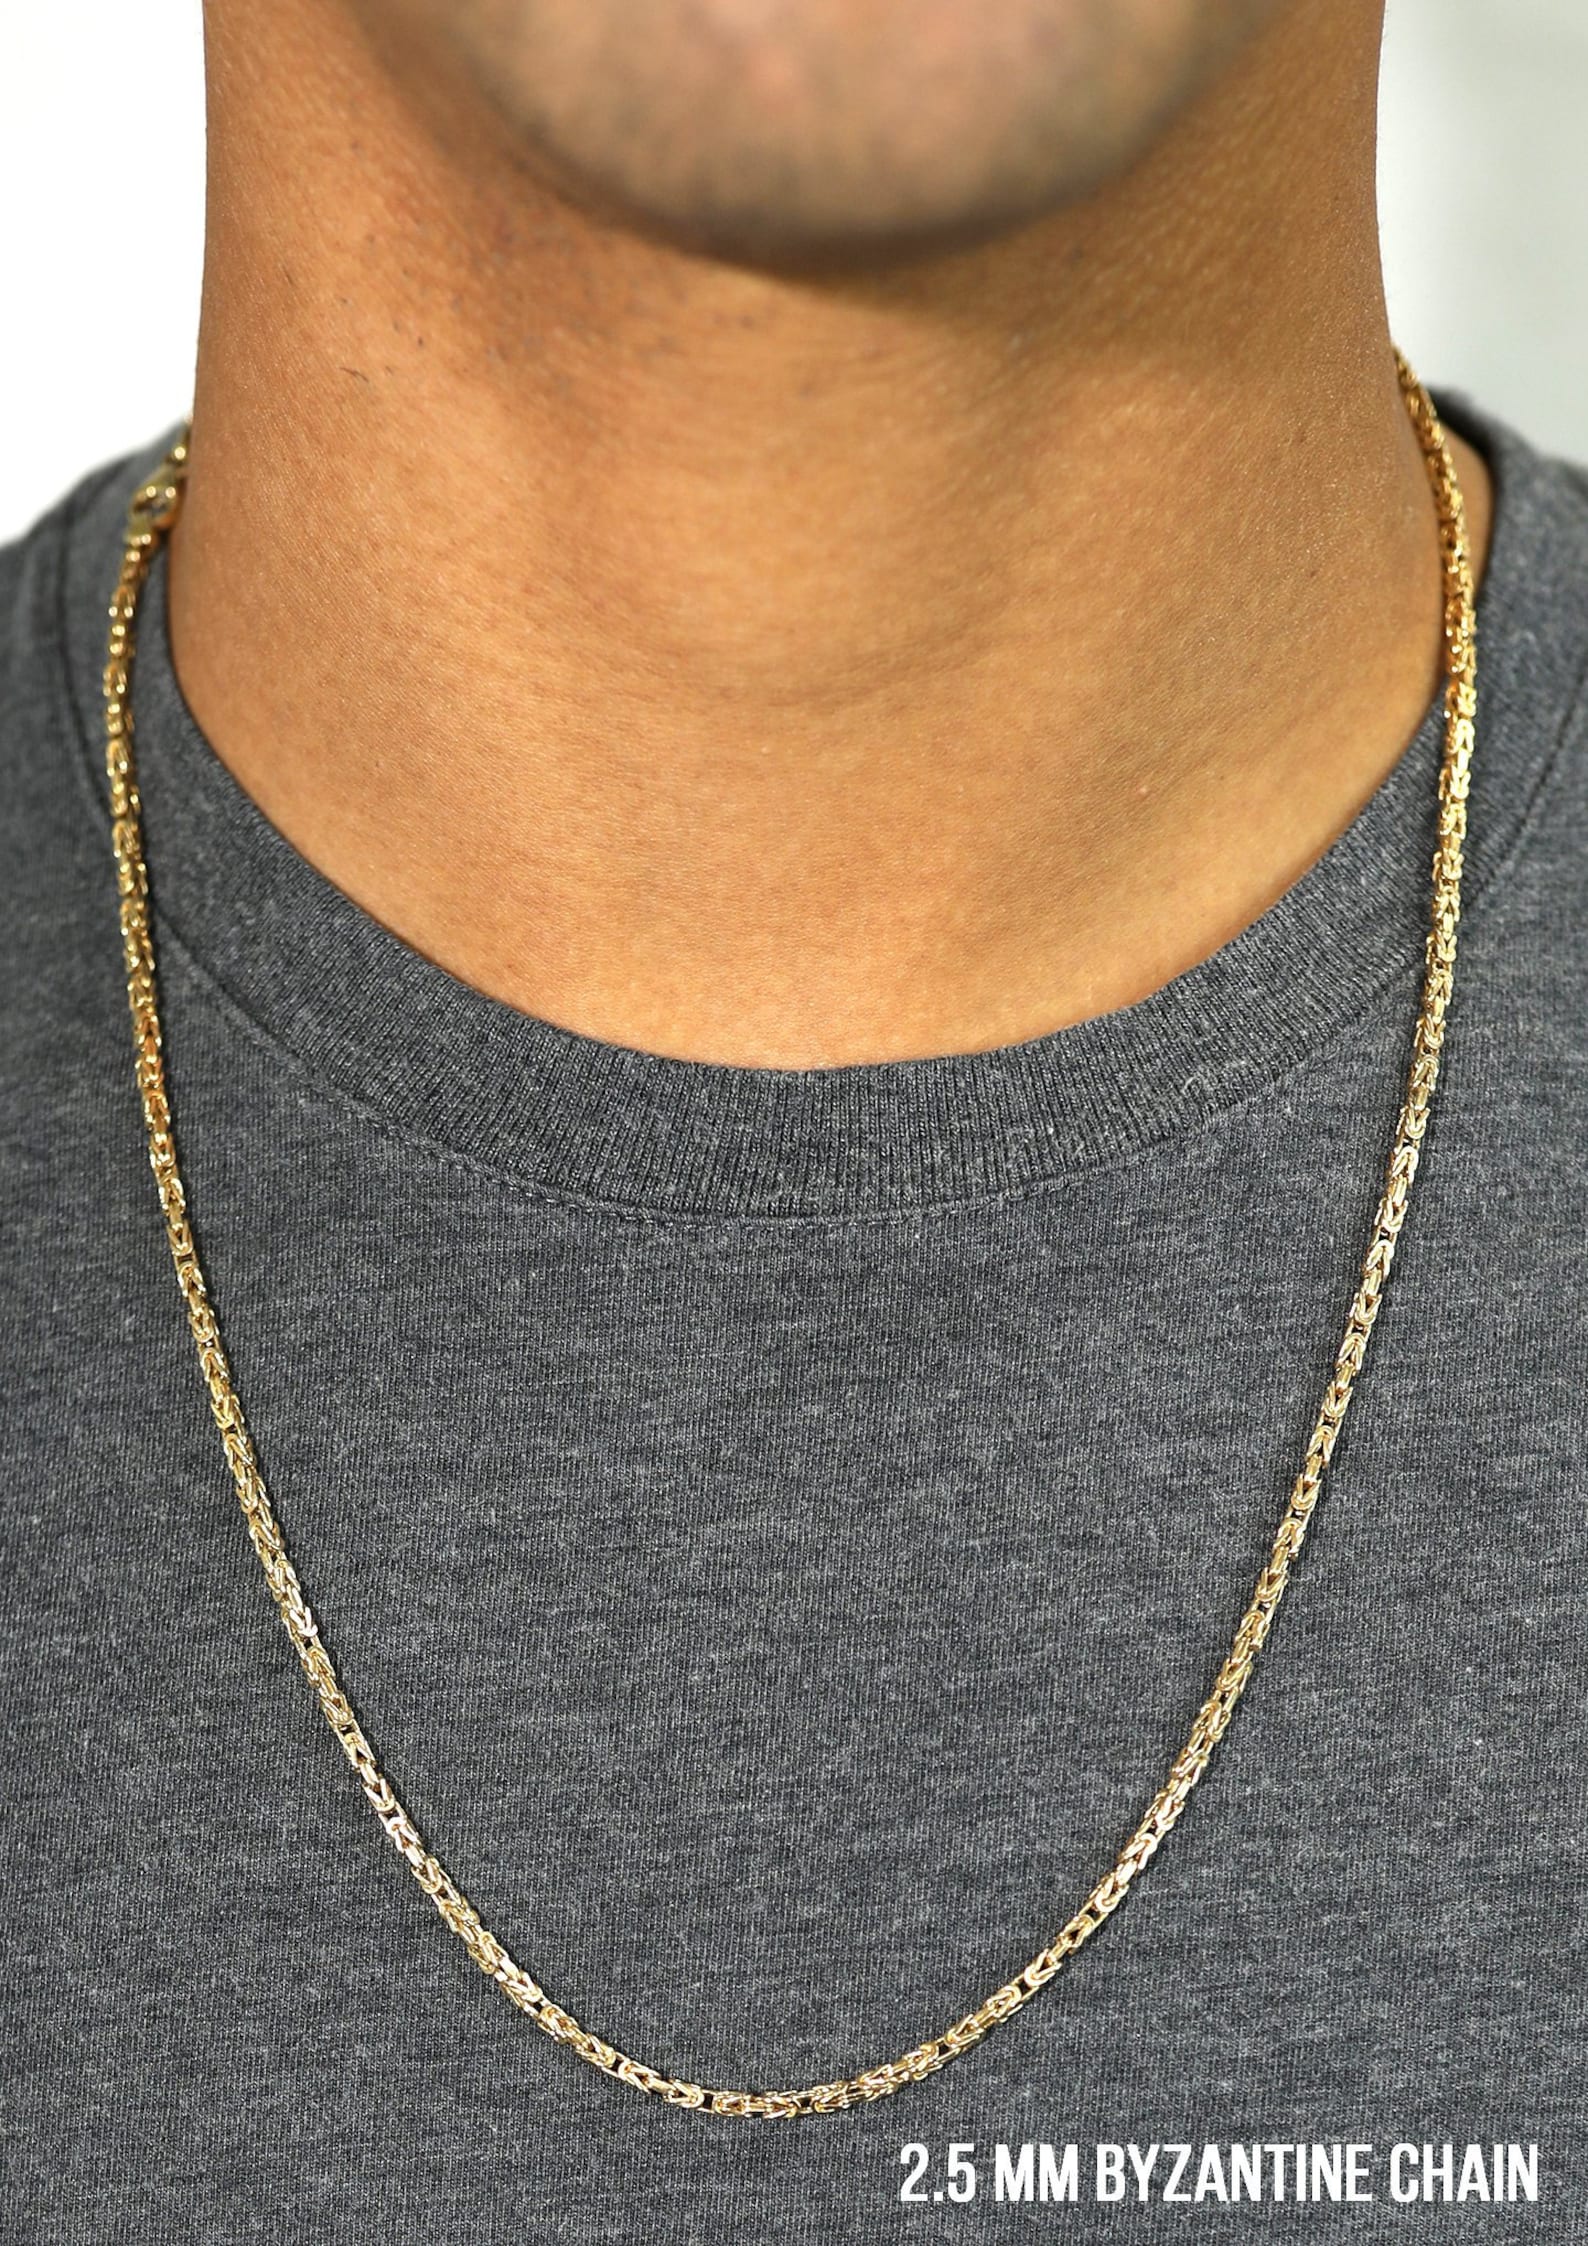 14k Yellow Gold Byzantine Chain Classic Necklace - Etsy